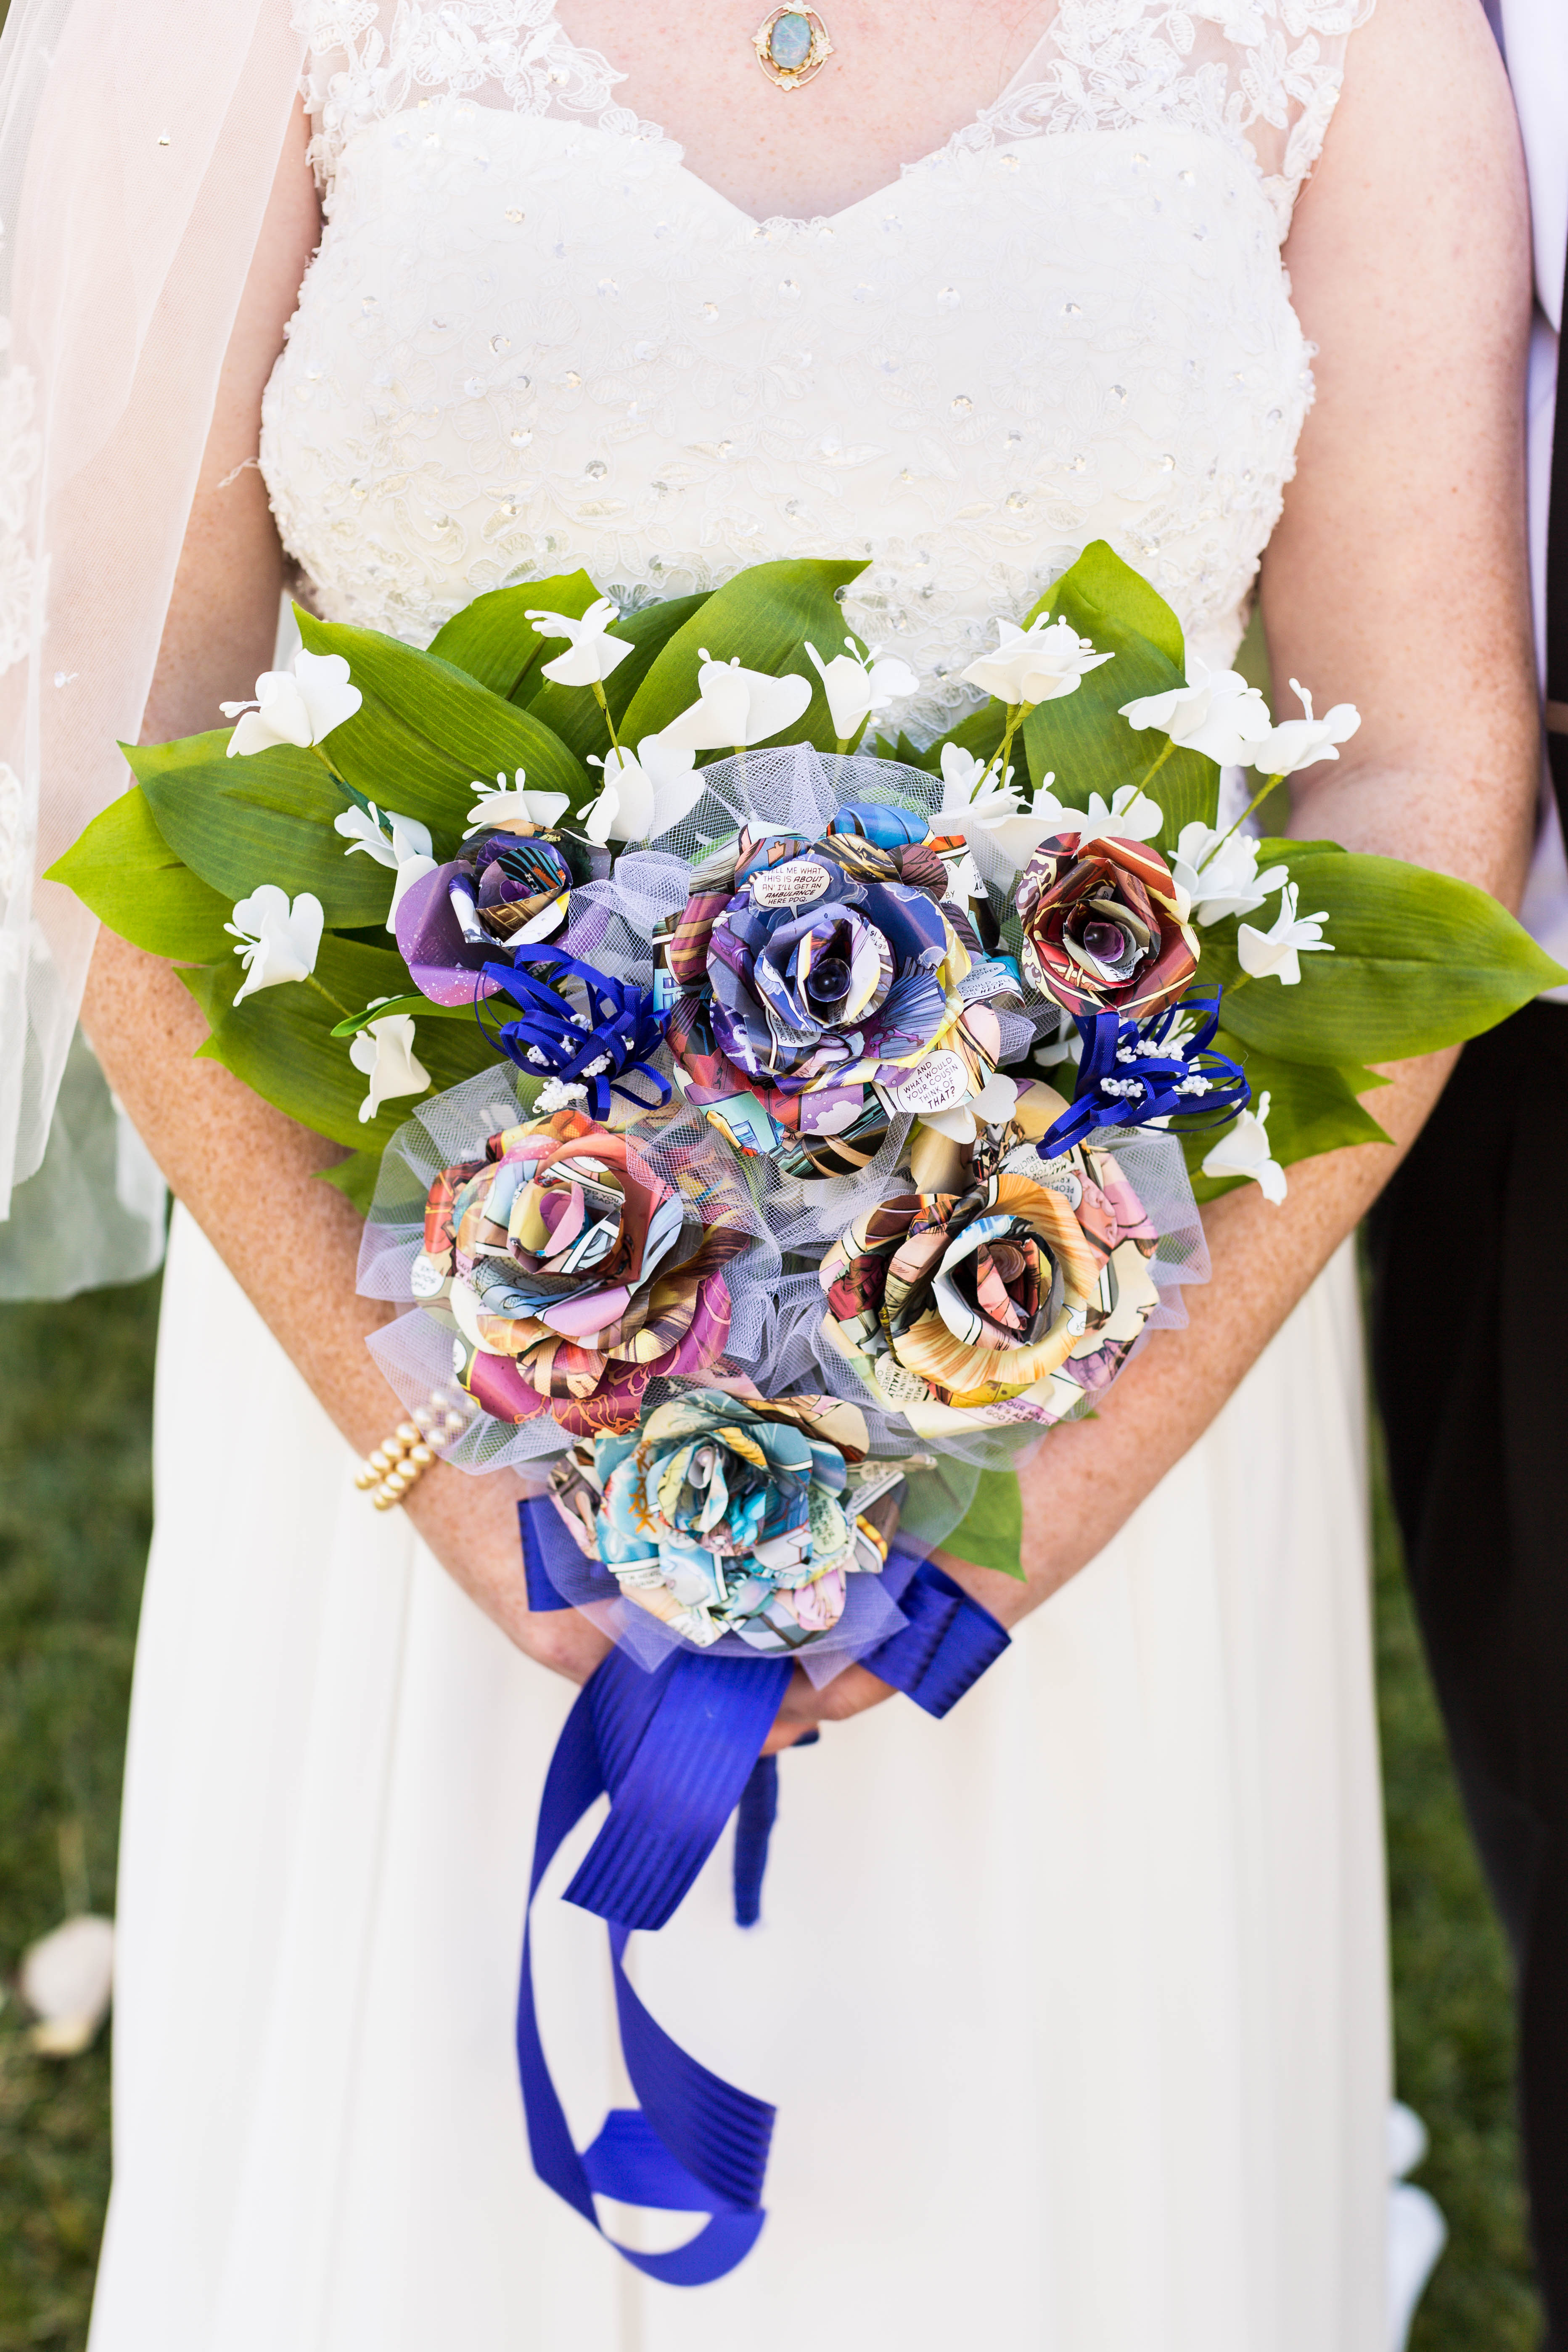 closeup of bridal bouquet made out of colorful comic strips